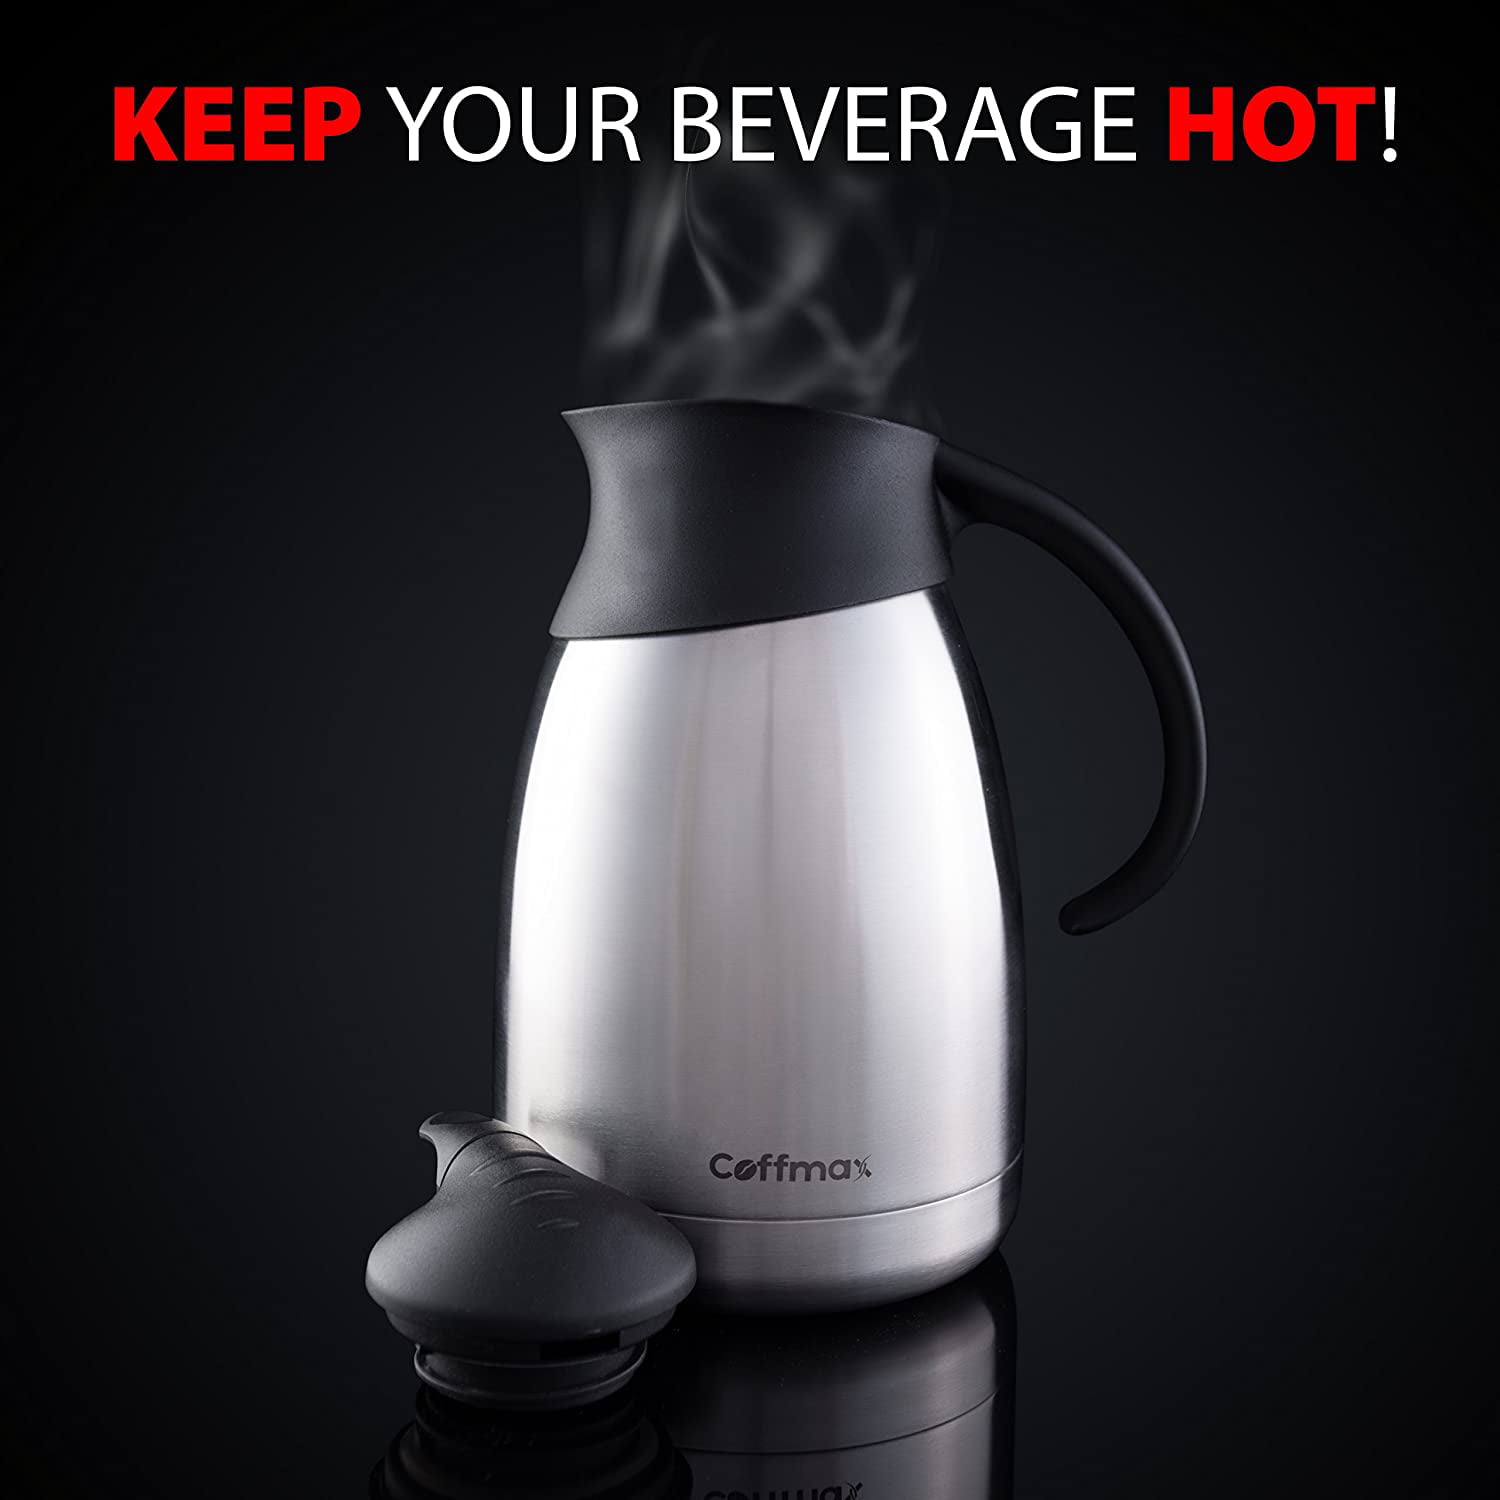 Vacuum Insulated Stainless Steel Coffee Carafe - European Style Thermal  Carafe And Hot Water Dispenser, Double Walled Insulated Jug For Tea, Water,  And Beverages, A Warm Companion For Your Morning